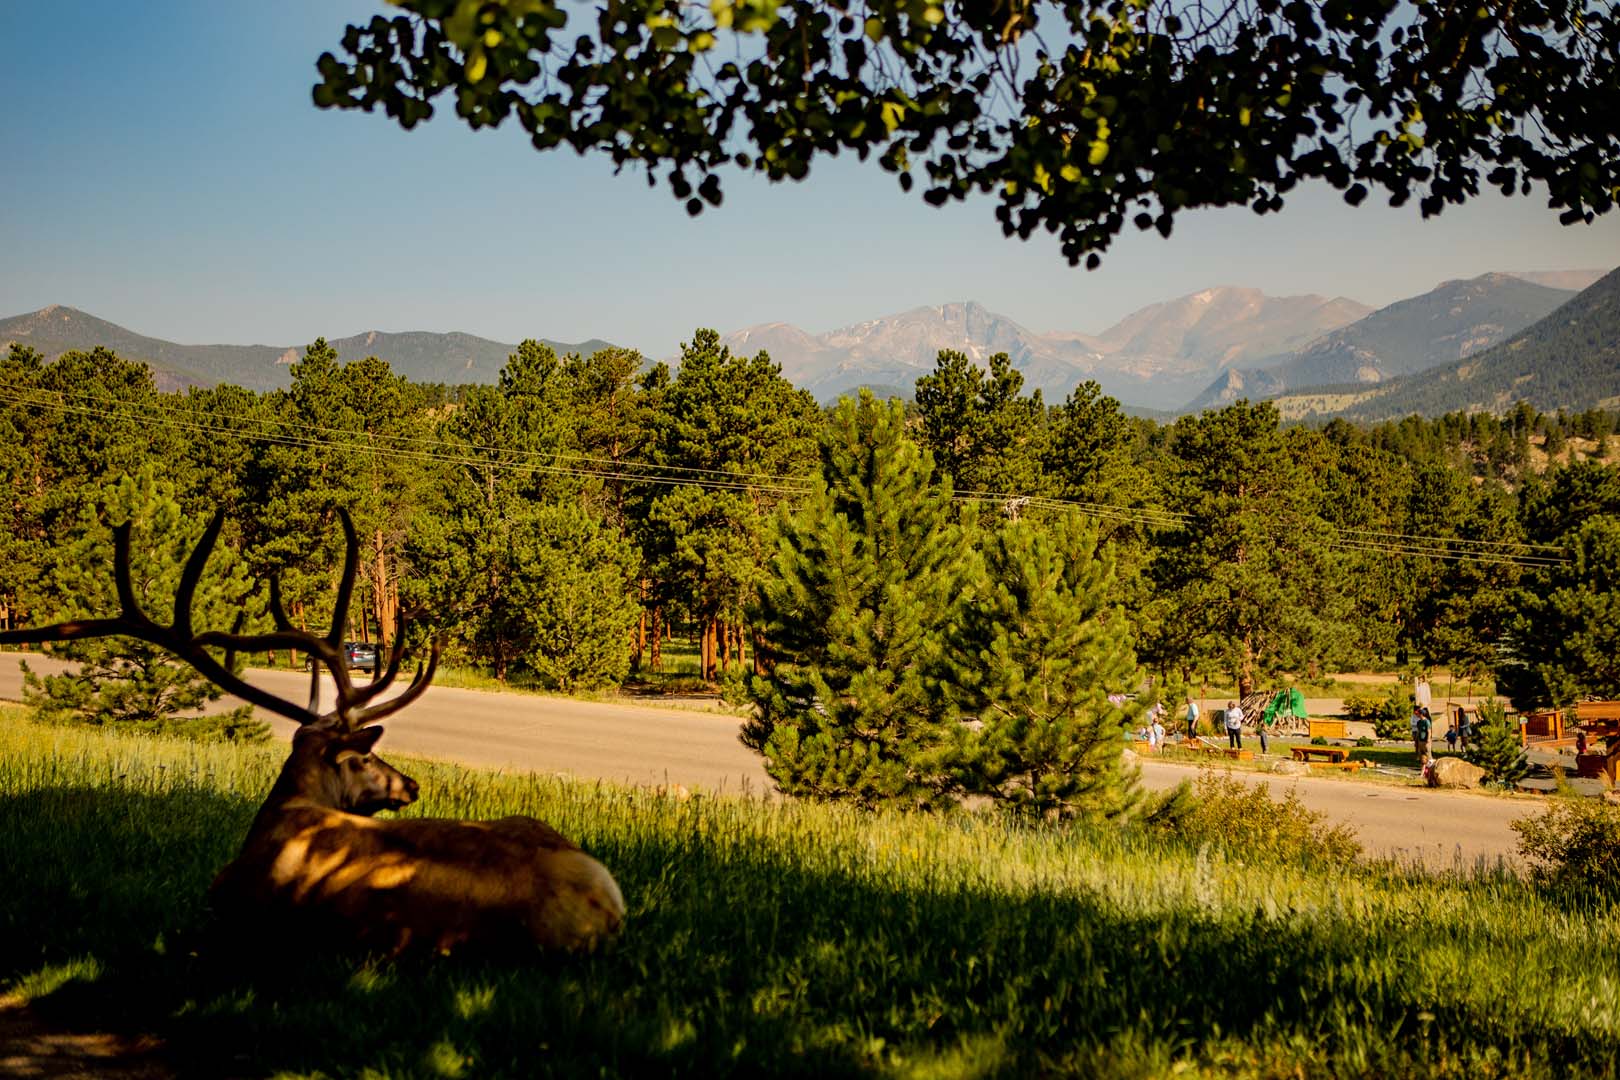 elk sitting in a field looking out over the mountains